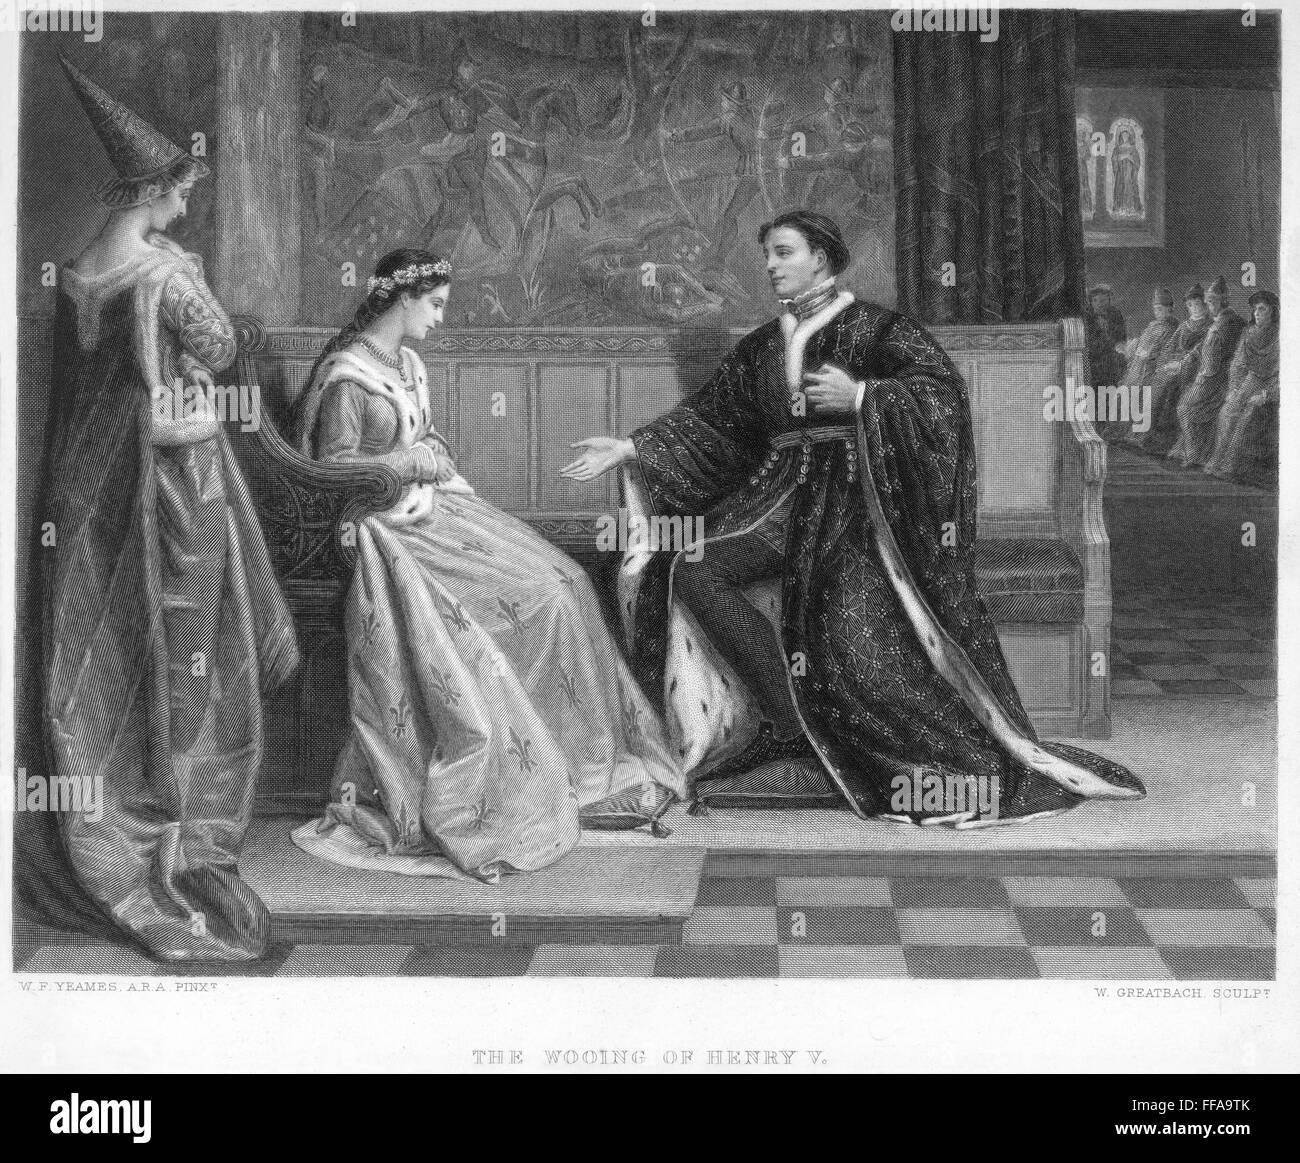 SHAKESPEARE: KING HENRY V. /nKing Henry wooing Princess Katharine of France (Catherine de Valois): steel engraving by W. Greatbach after W.F. Yeames, A.R.A., late 19th century. Stock Photo